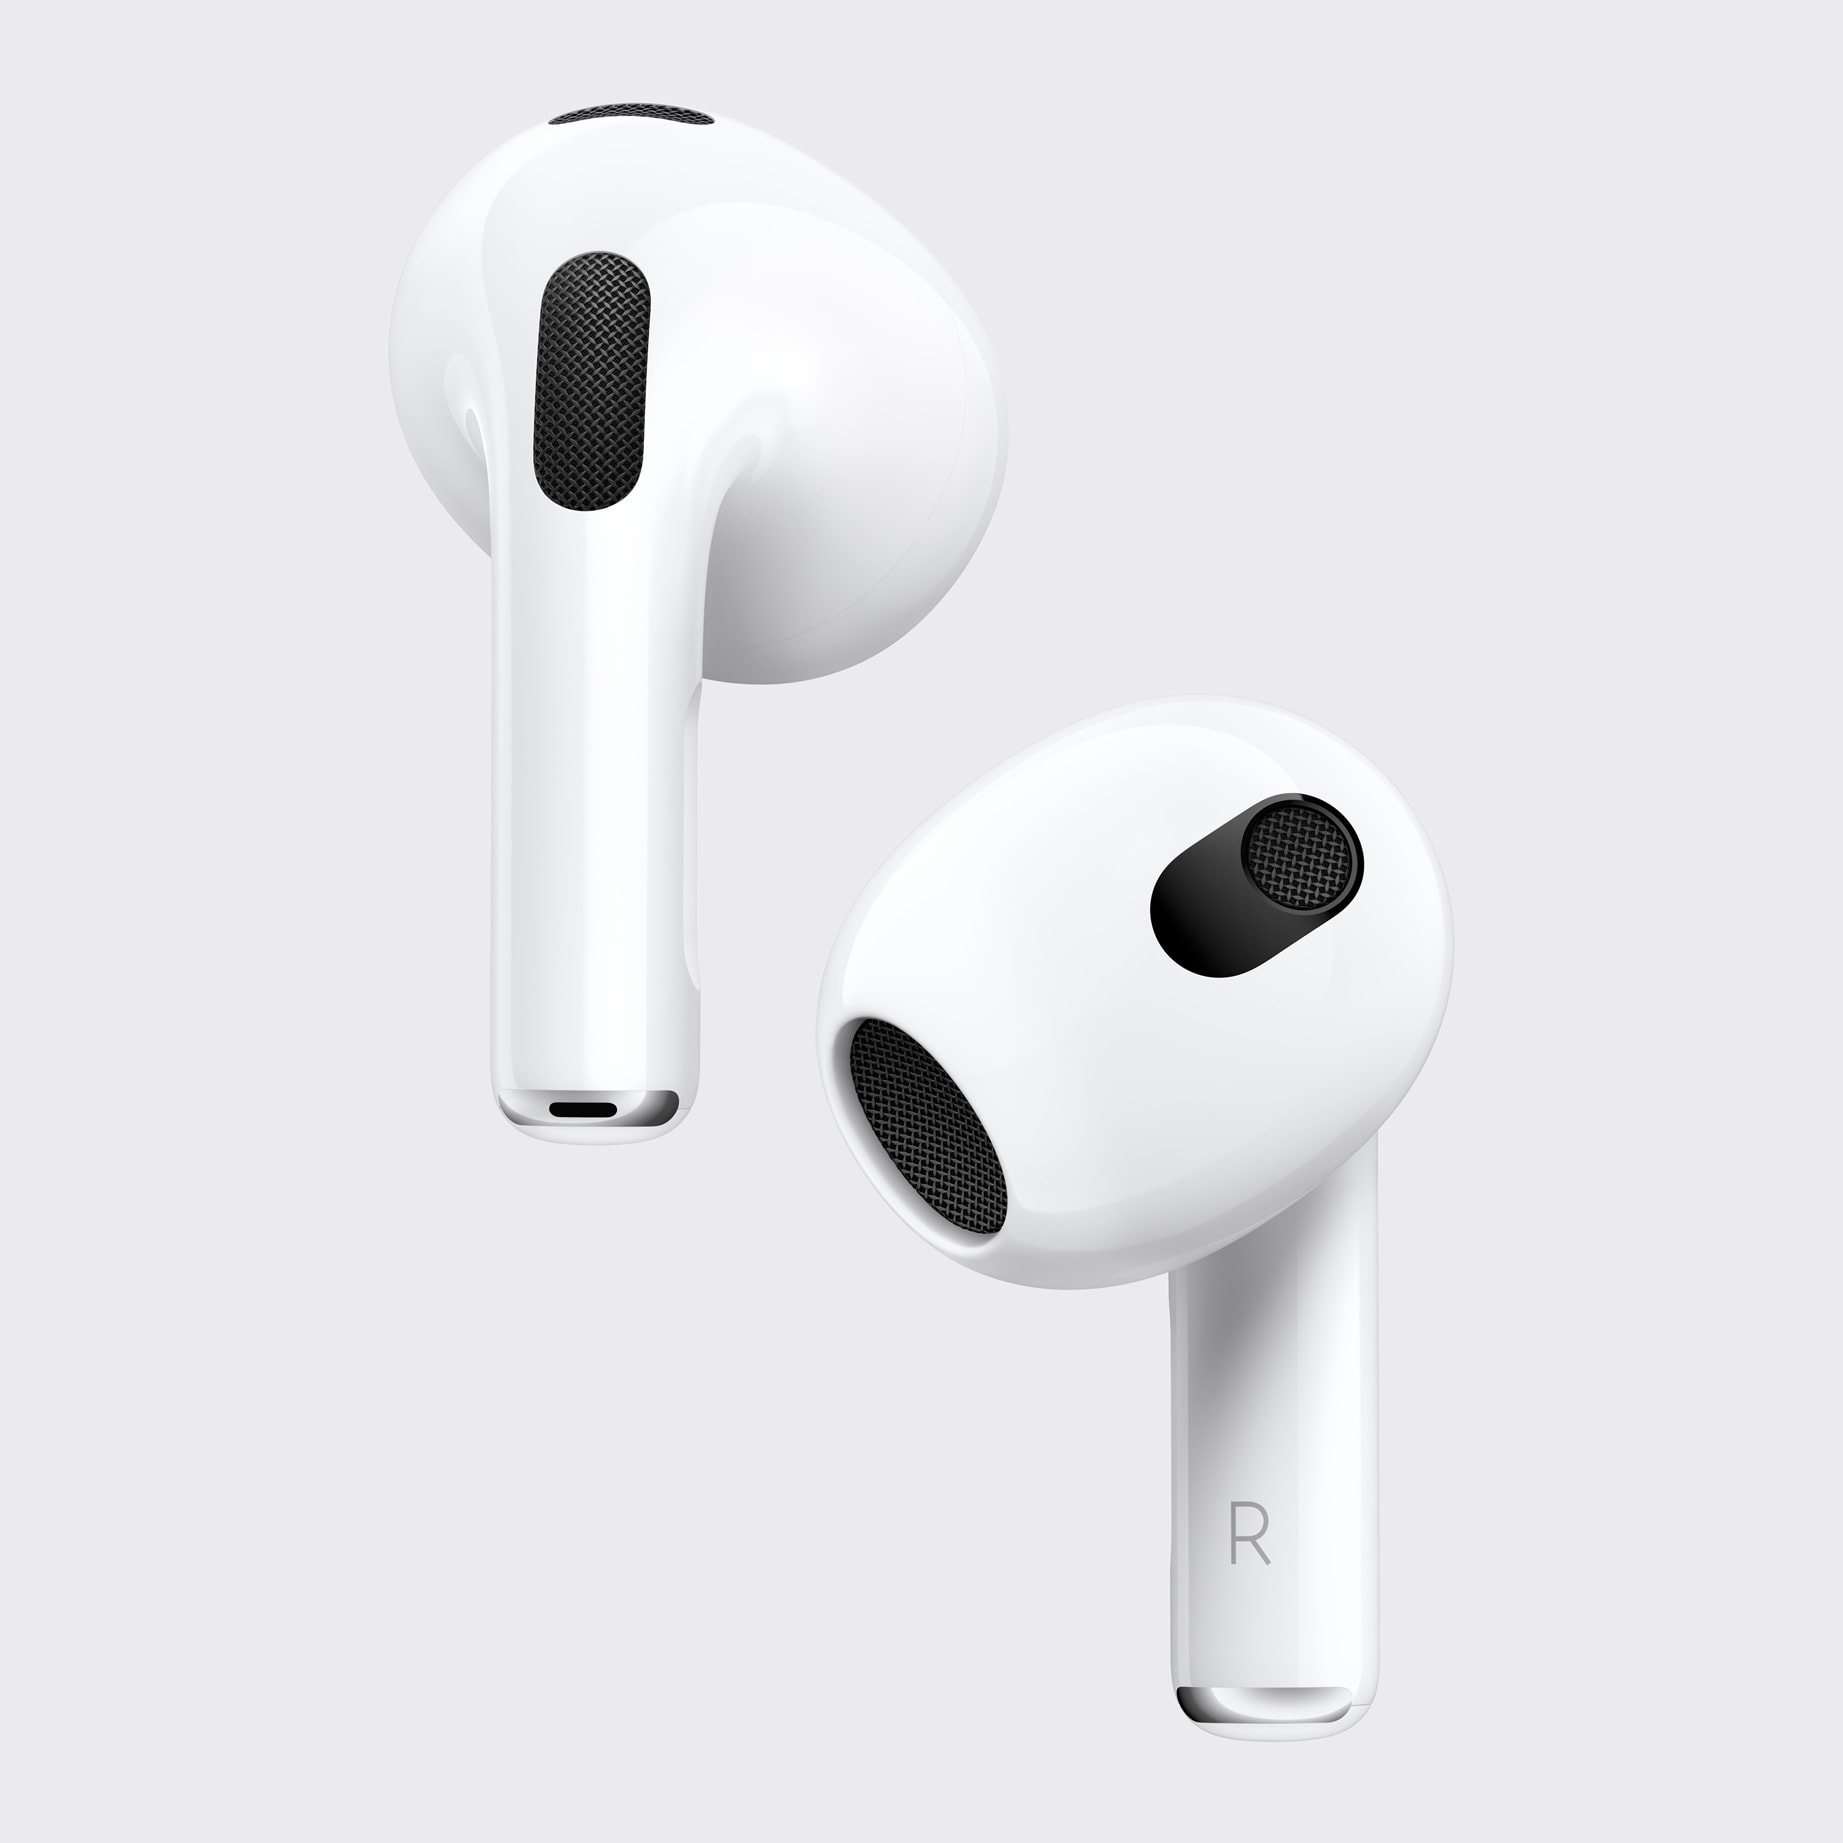 How to connect your AirPods to an iPhone (and just about any other device)